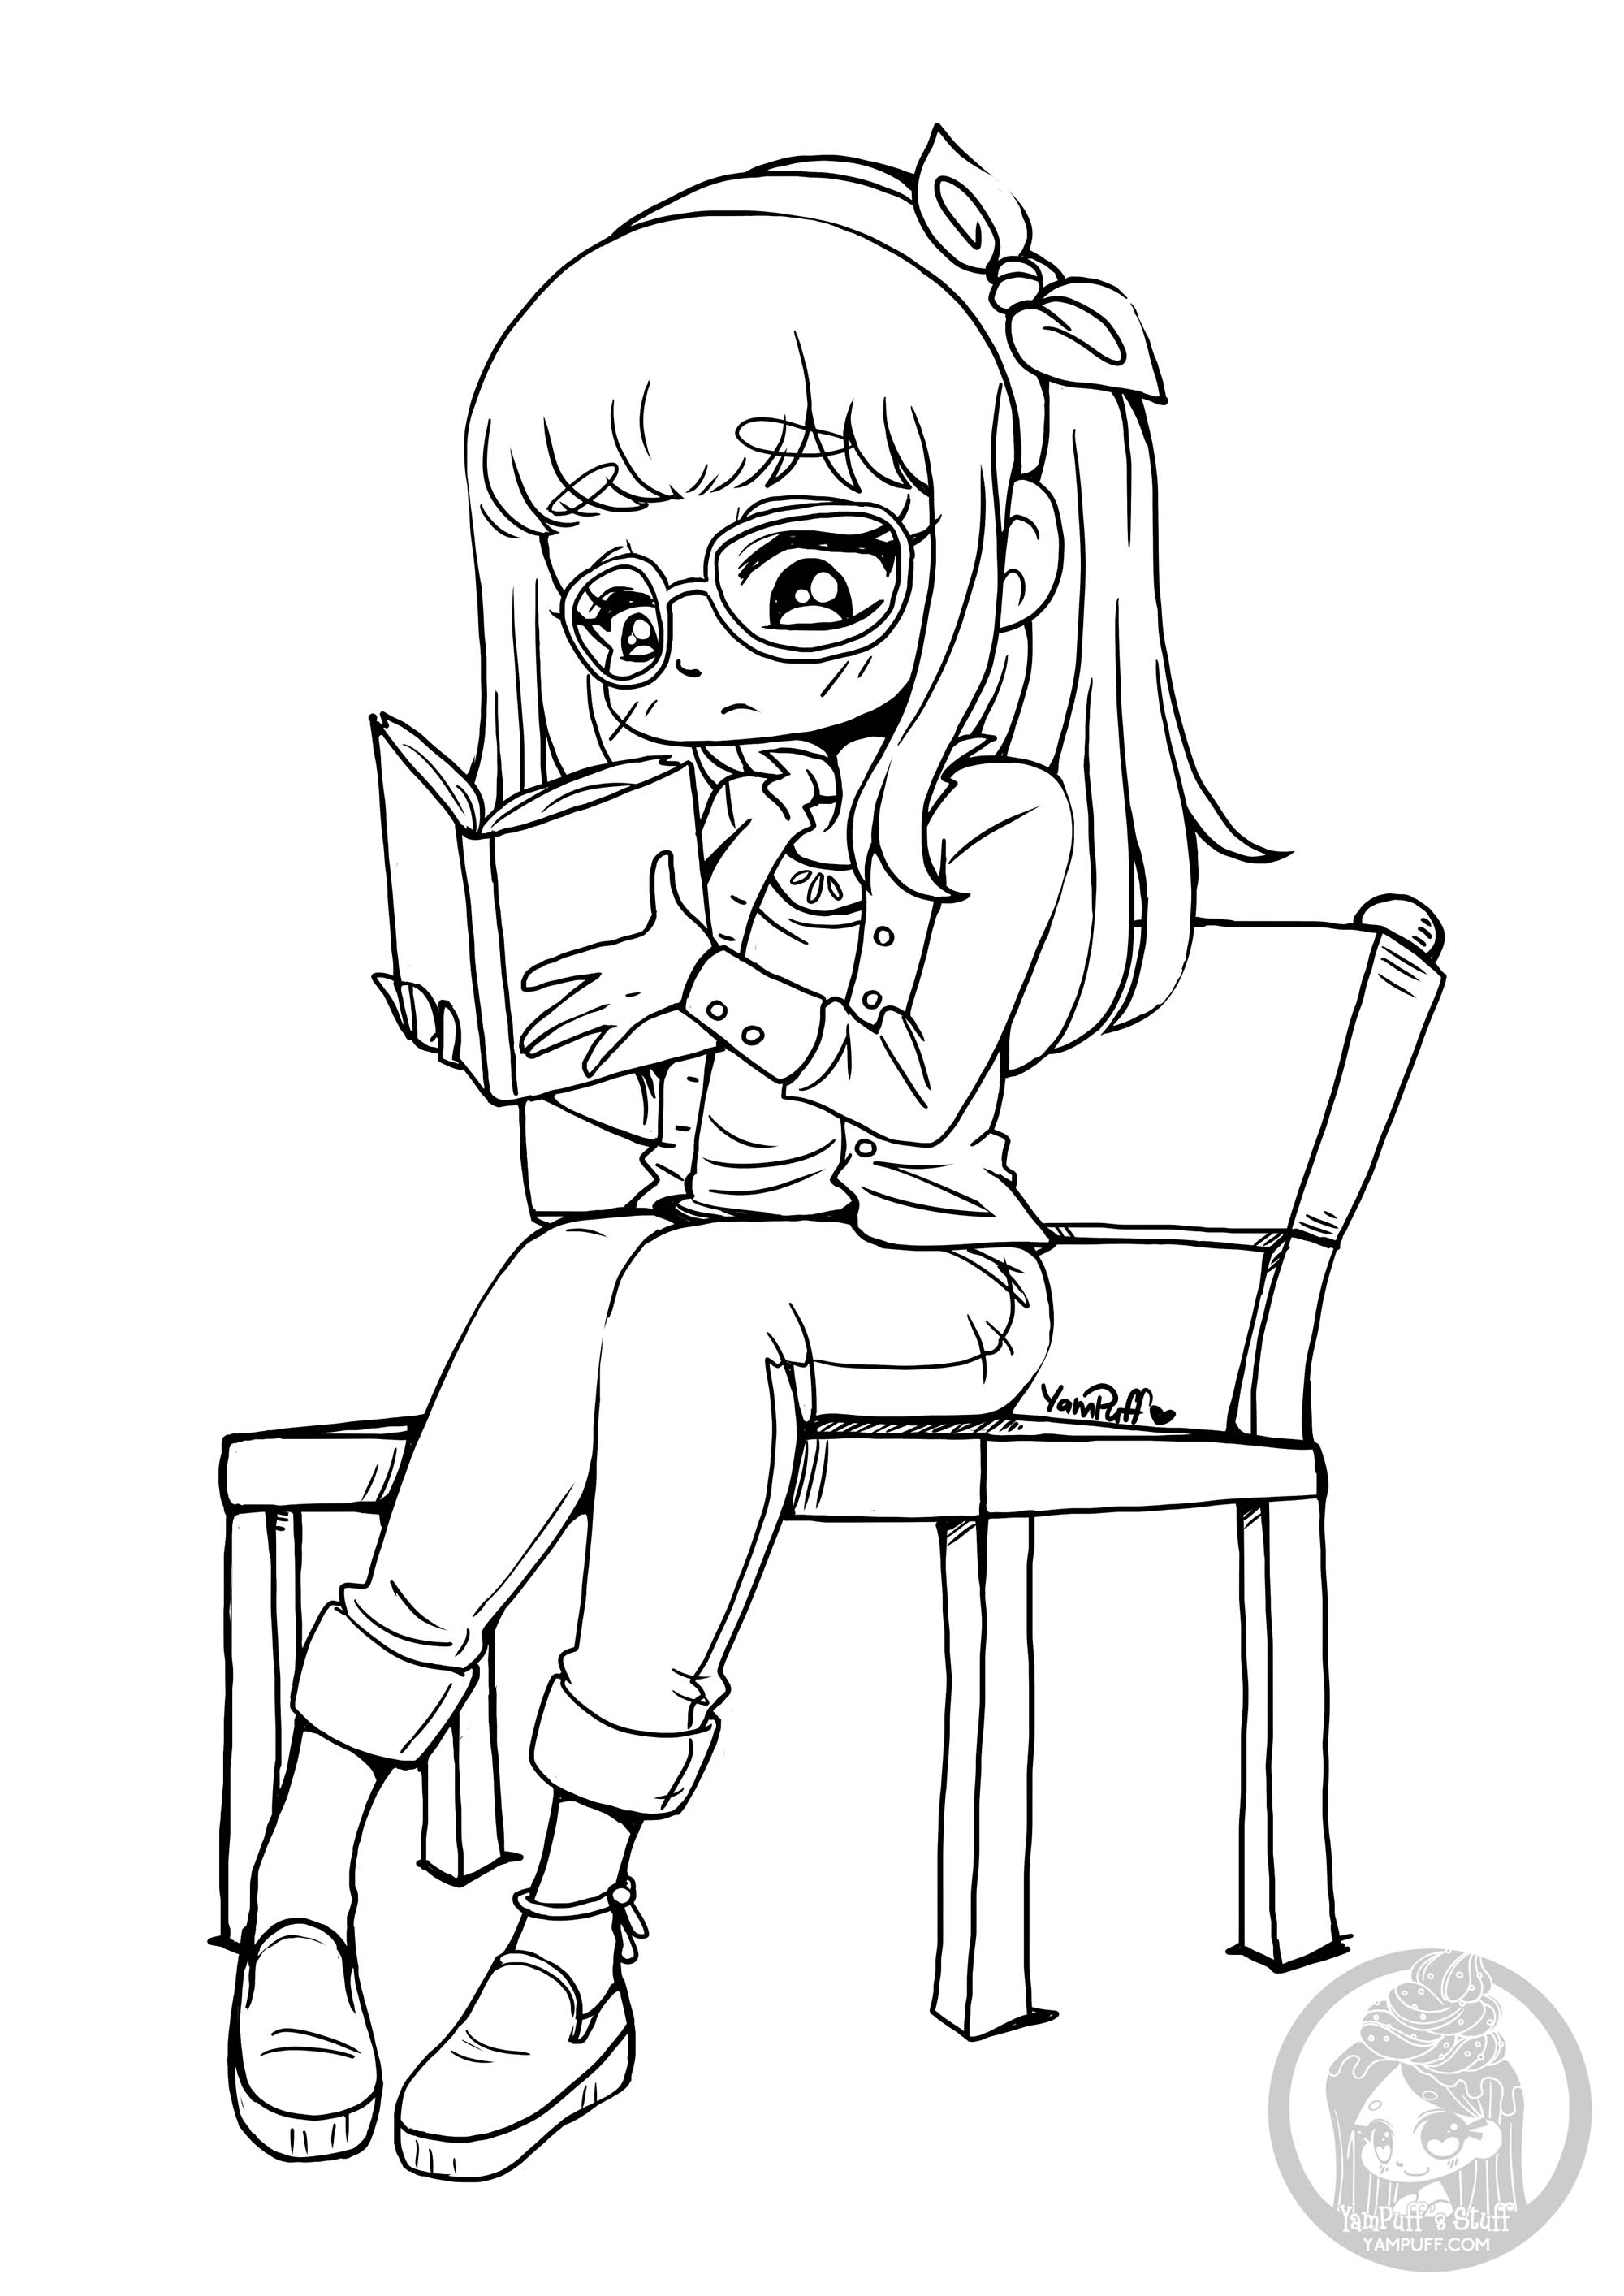 Colour it in quietly so as not to disturb that girl reading!. This girl is calm and peaceful, and you can almost hear the silence. Color her in quietly so as not to disturb this pretty reader, Artist : Yampuff